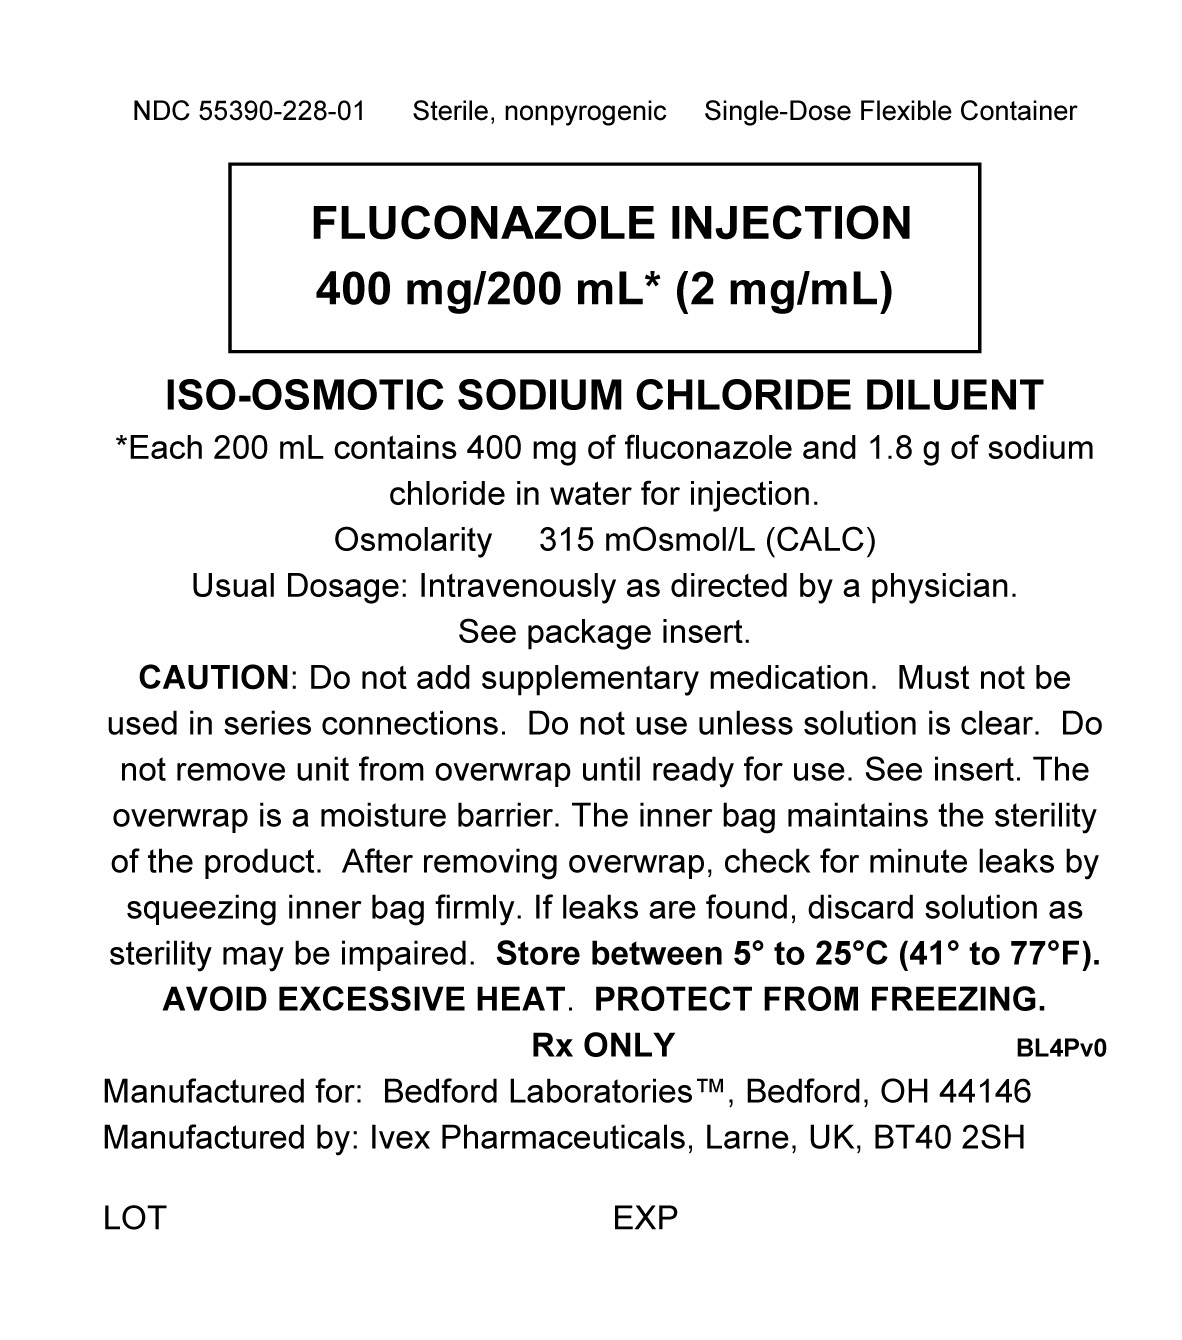 Flexible Container for the 200 mL dosage of Fluconazole Injection